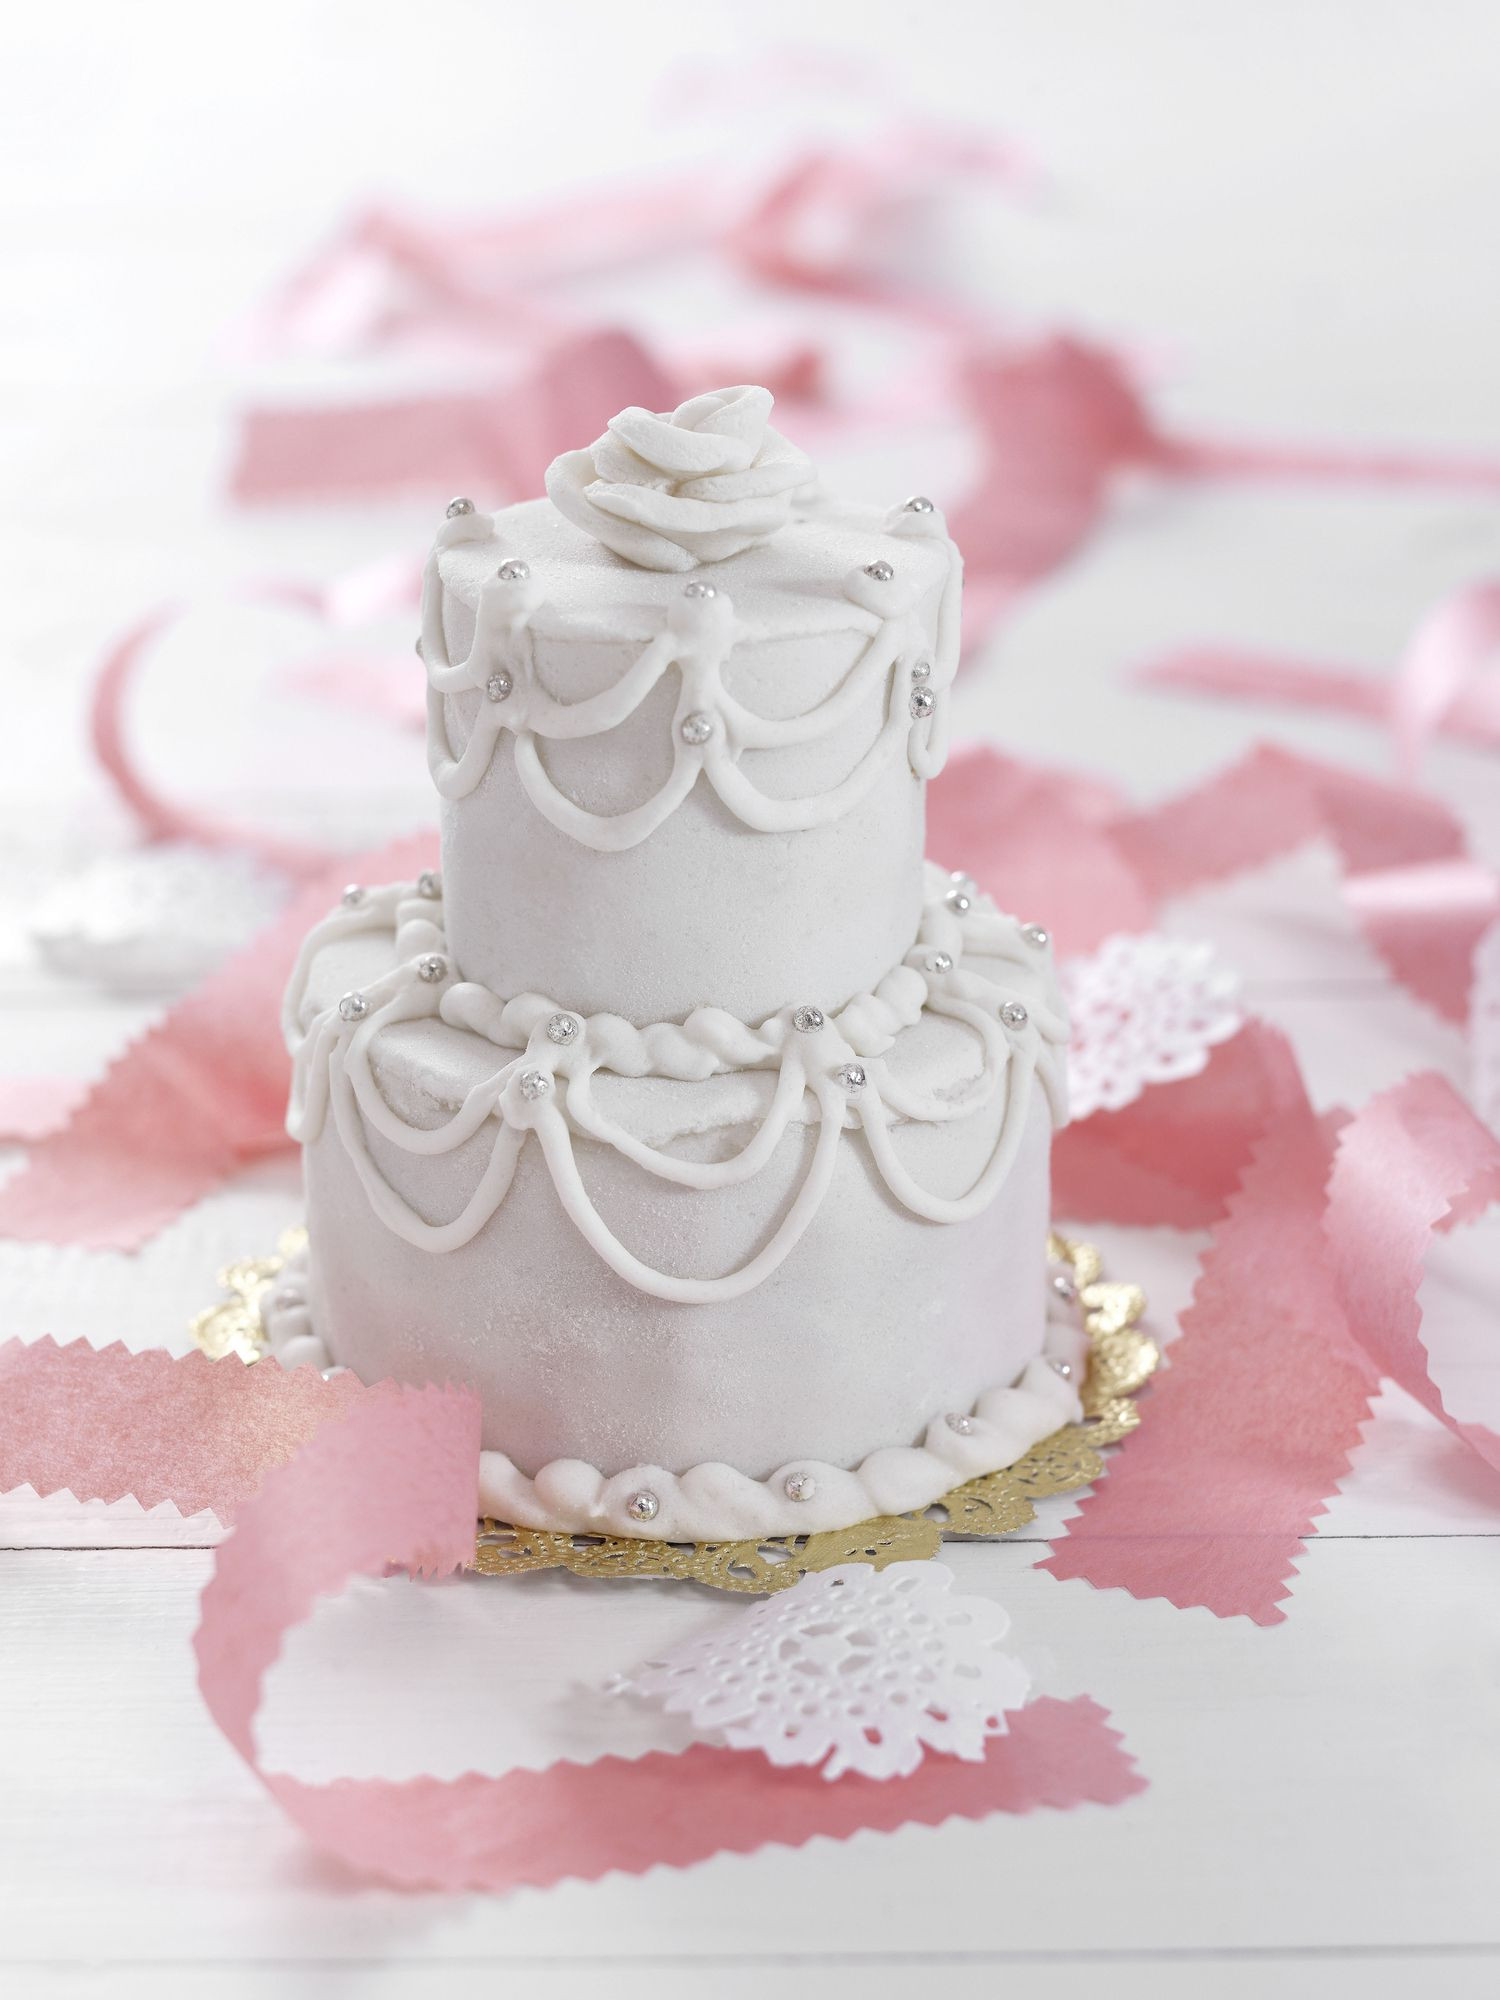 Making A Wedding Cakes
 How to Make a Wedding Cake a Beginner s Guide